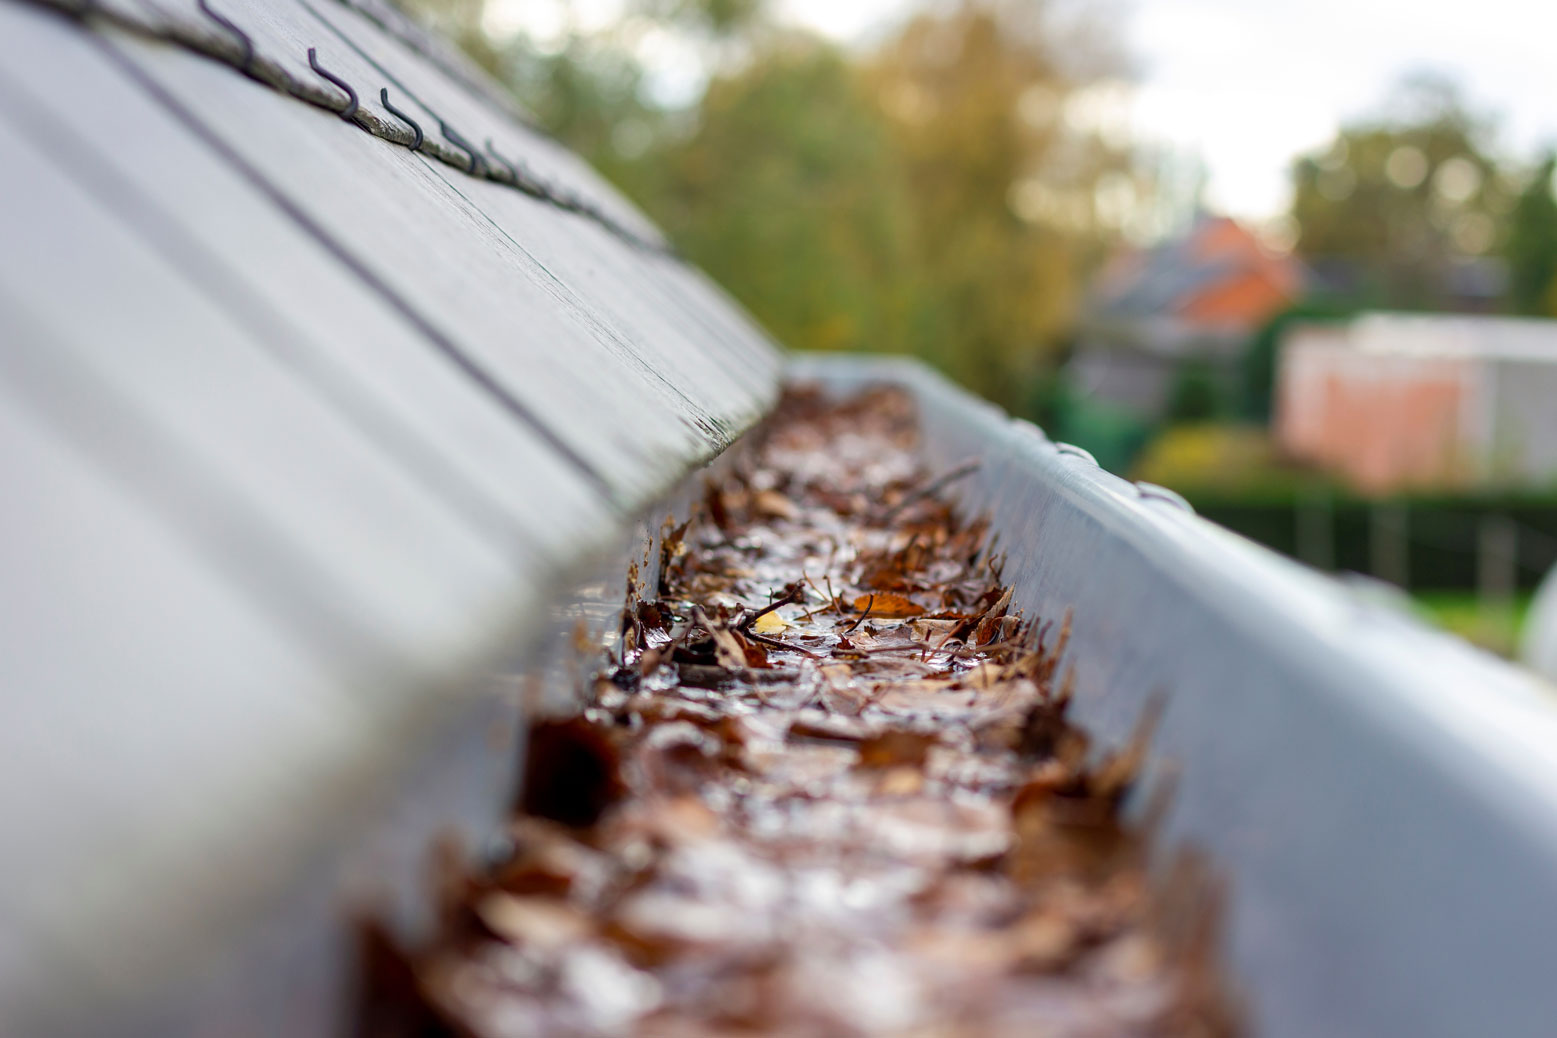 Fall Gutter Cleaning Guide: Why It’s Important and How To Do It